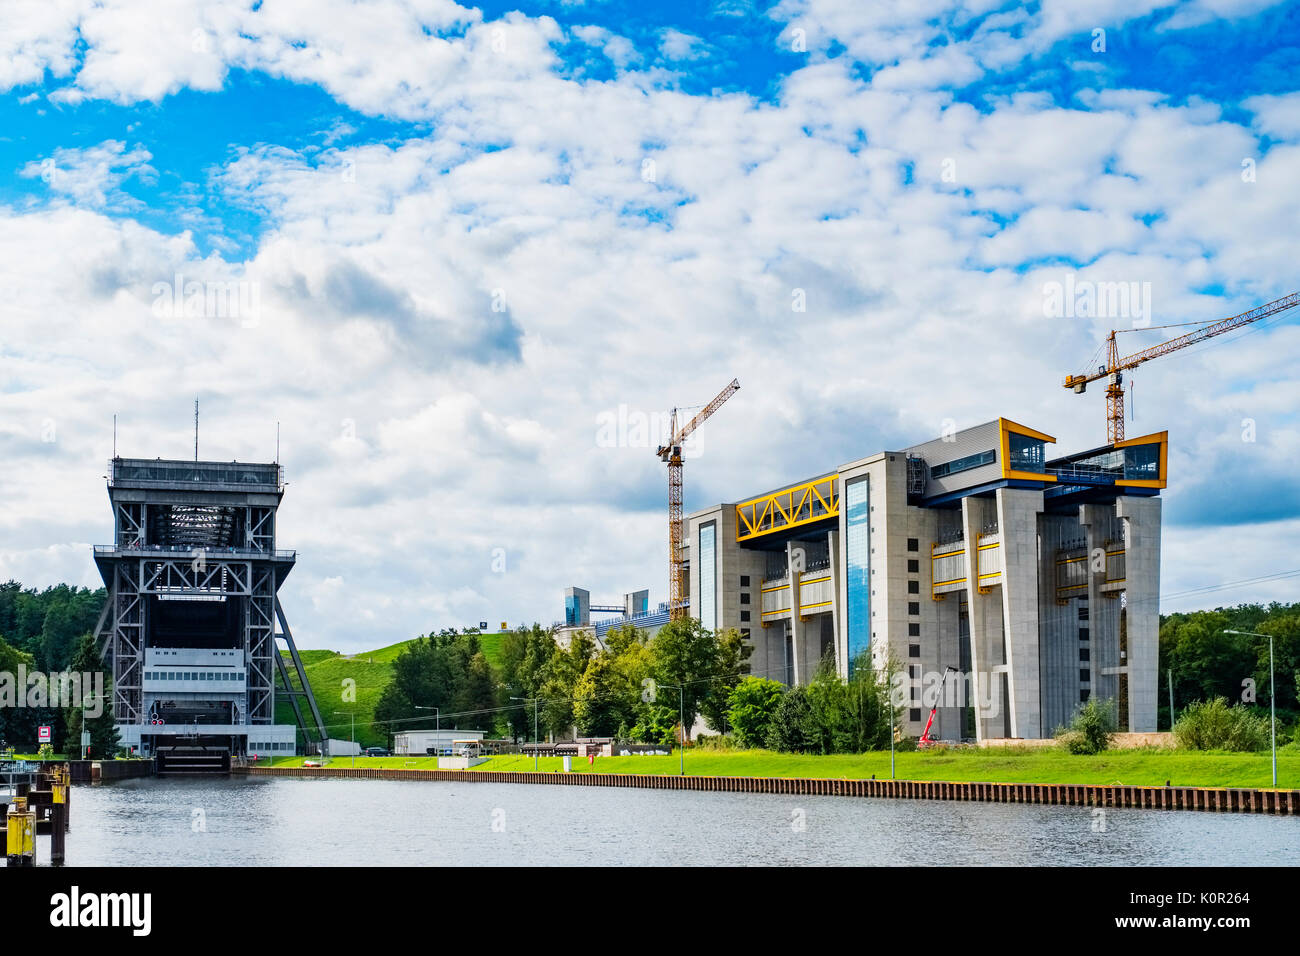 View of ship lifts at Niederfinow in Brandenburg, Germany. The old one on the left and new one under construction. Stock Photo